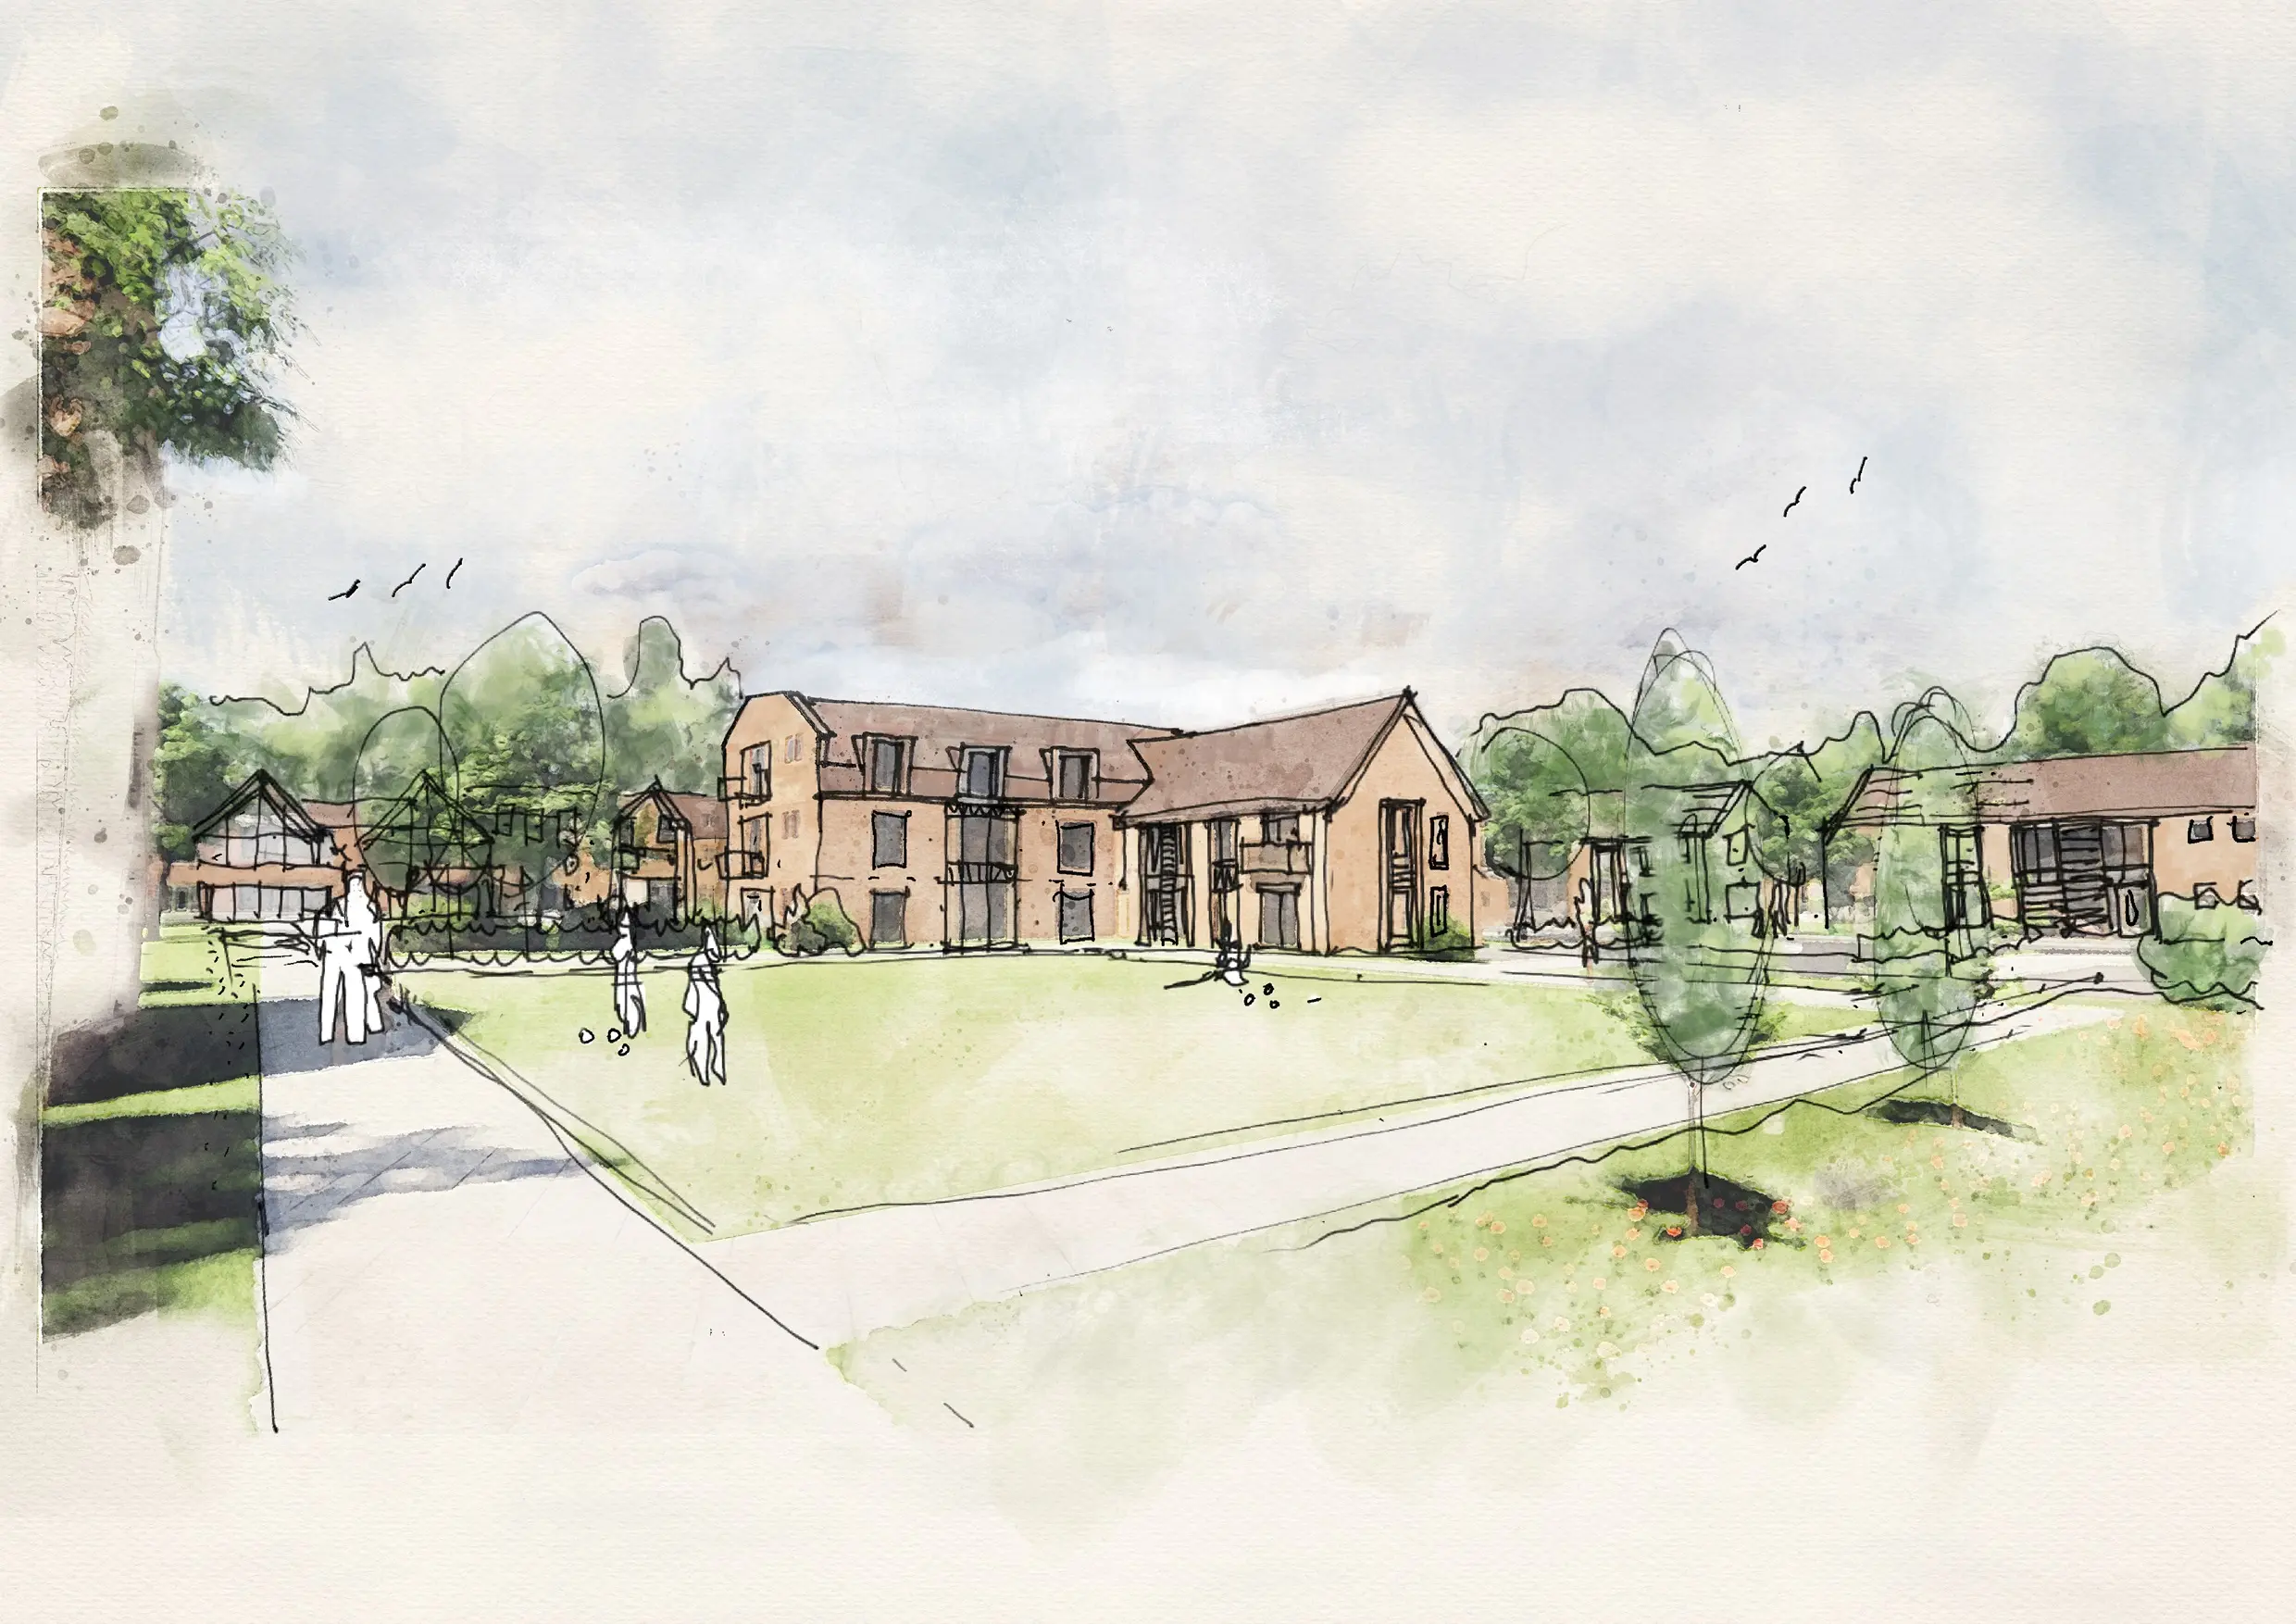 Opus Villages | Public Consultation for an Integrated Retirement Community at Barford